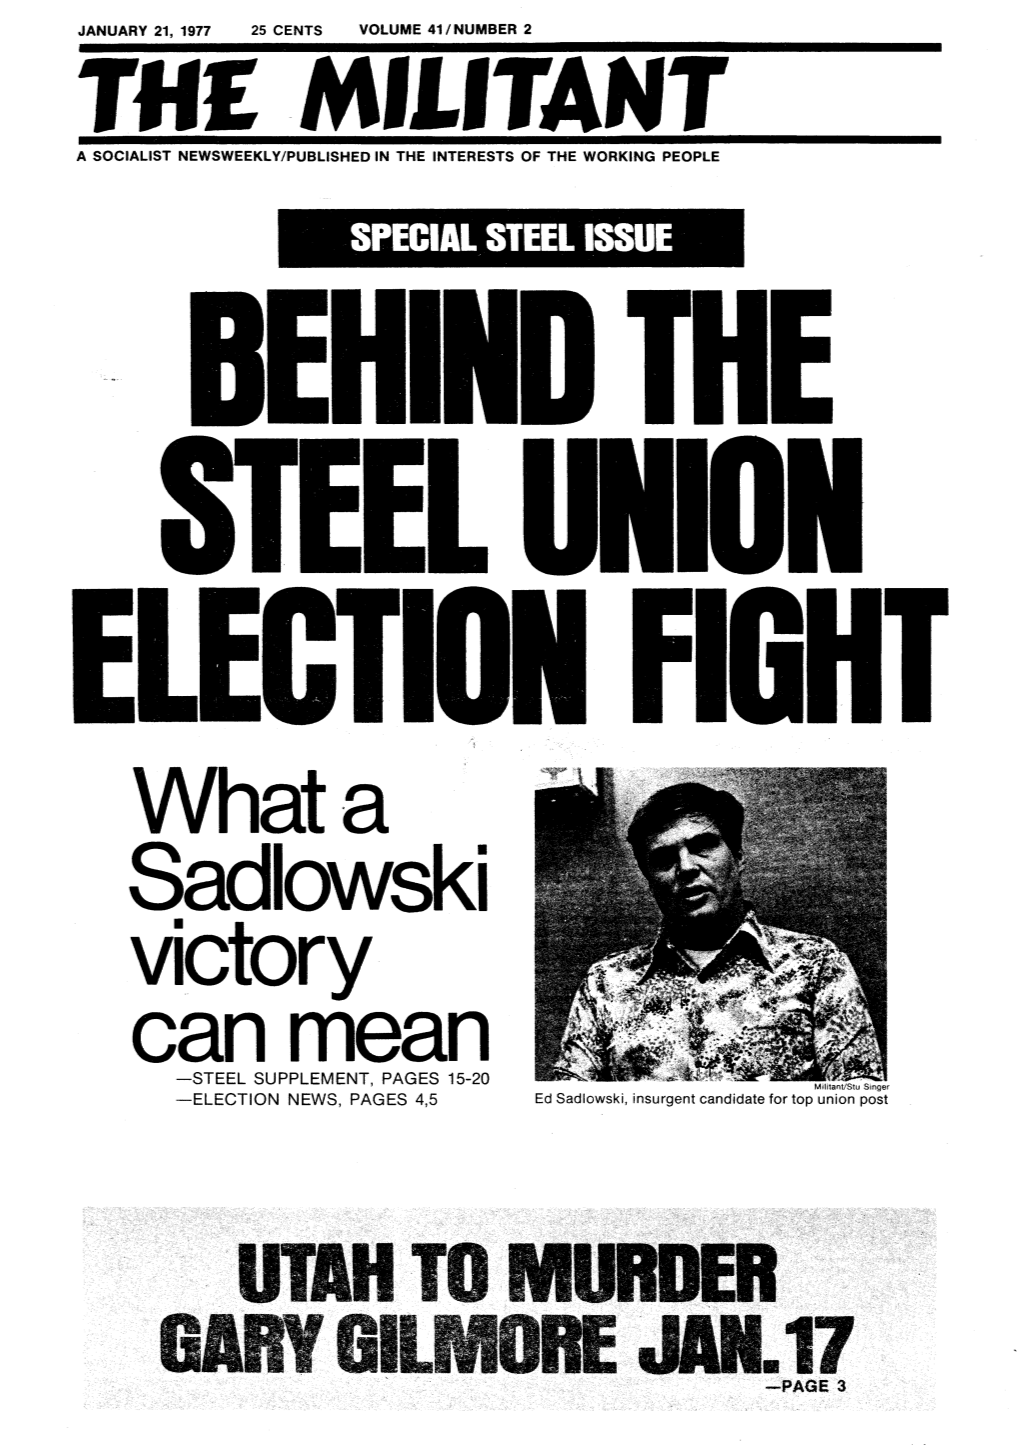 Hat a Sadlowski Victory Can Mean -STEEL SUPPLEMENT, PAGES 15-20 Militanvstu Singer -ELECTION NEWS, PAGES 4,5 Ed Sadlowski, Insurgent Candidate for Top Union Post